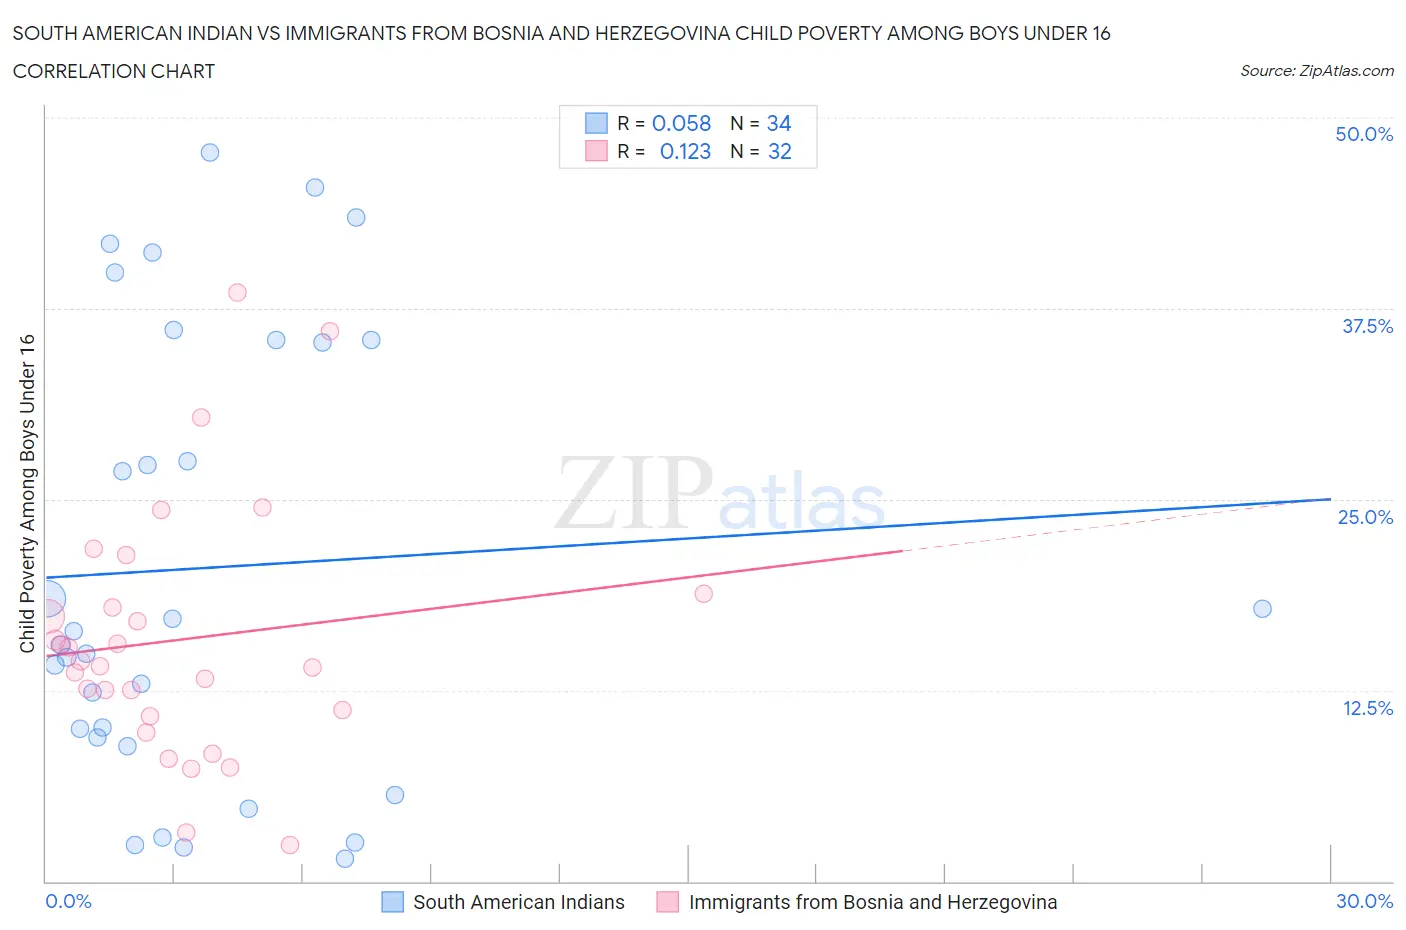 South American Indian vs Immigrants from Bosnia and Herzegovina Child Poverty Among Boys Under 16